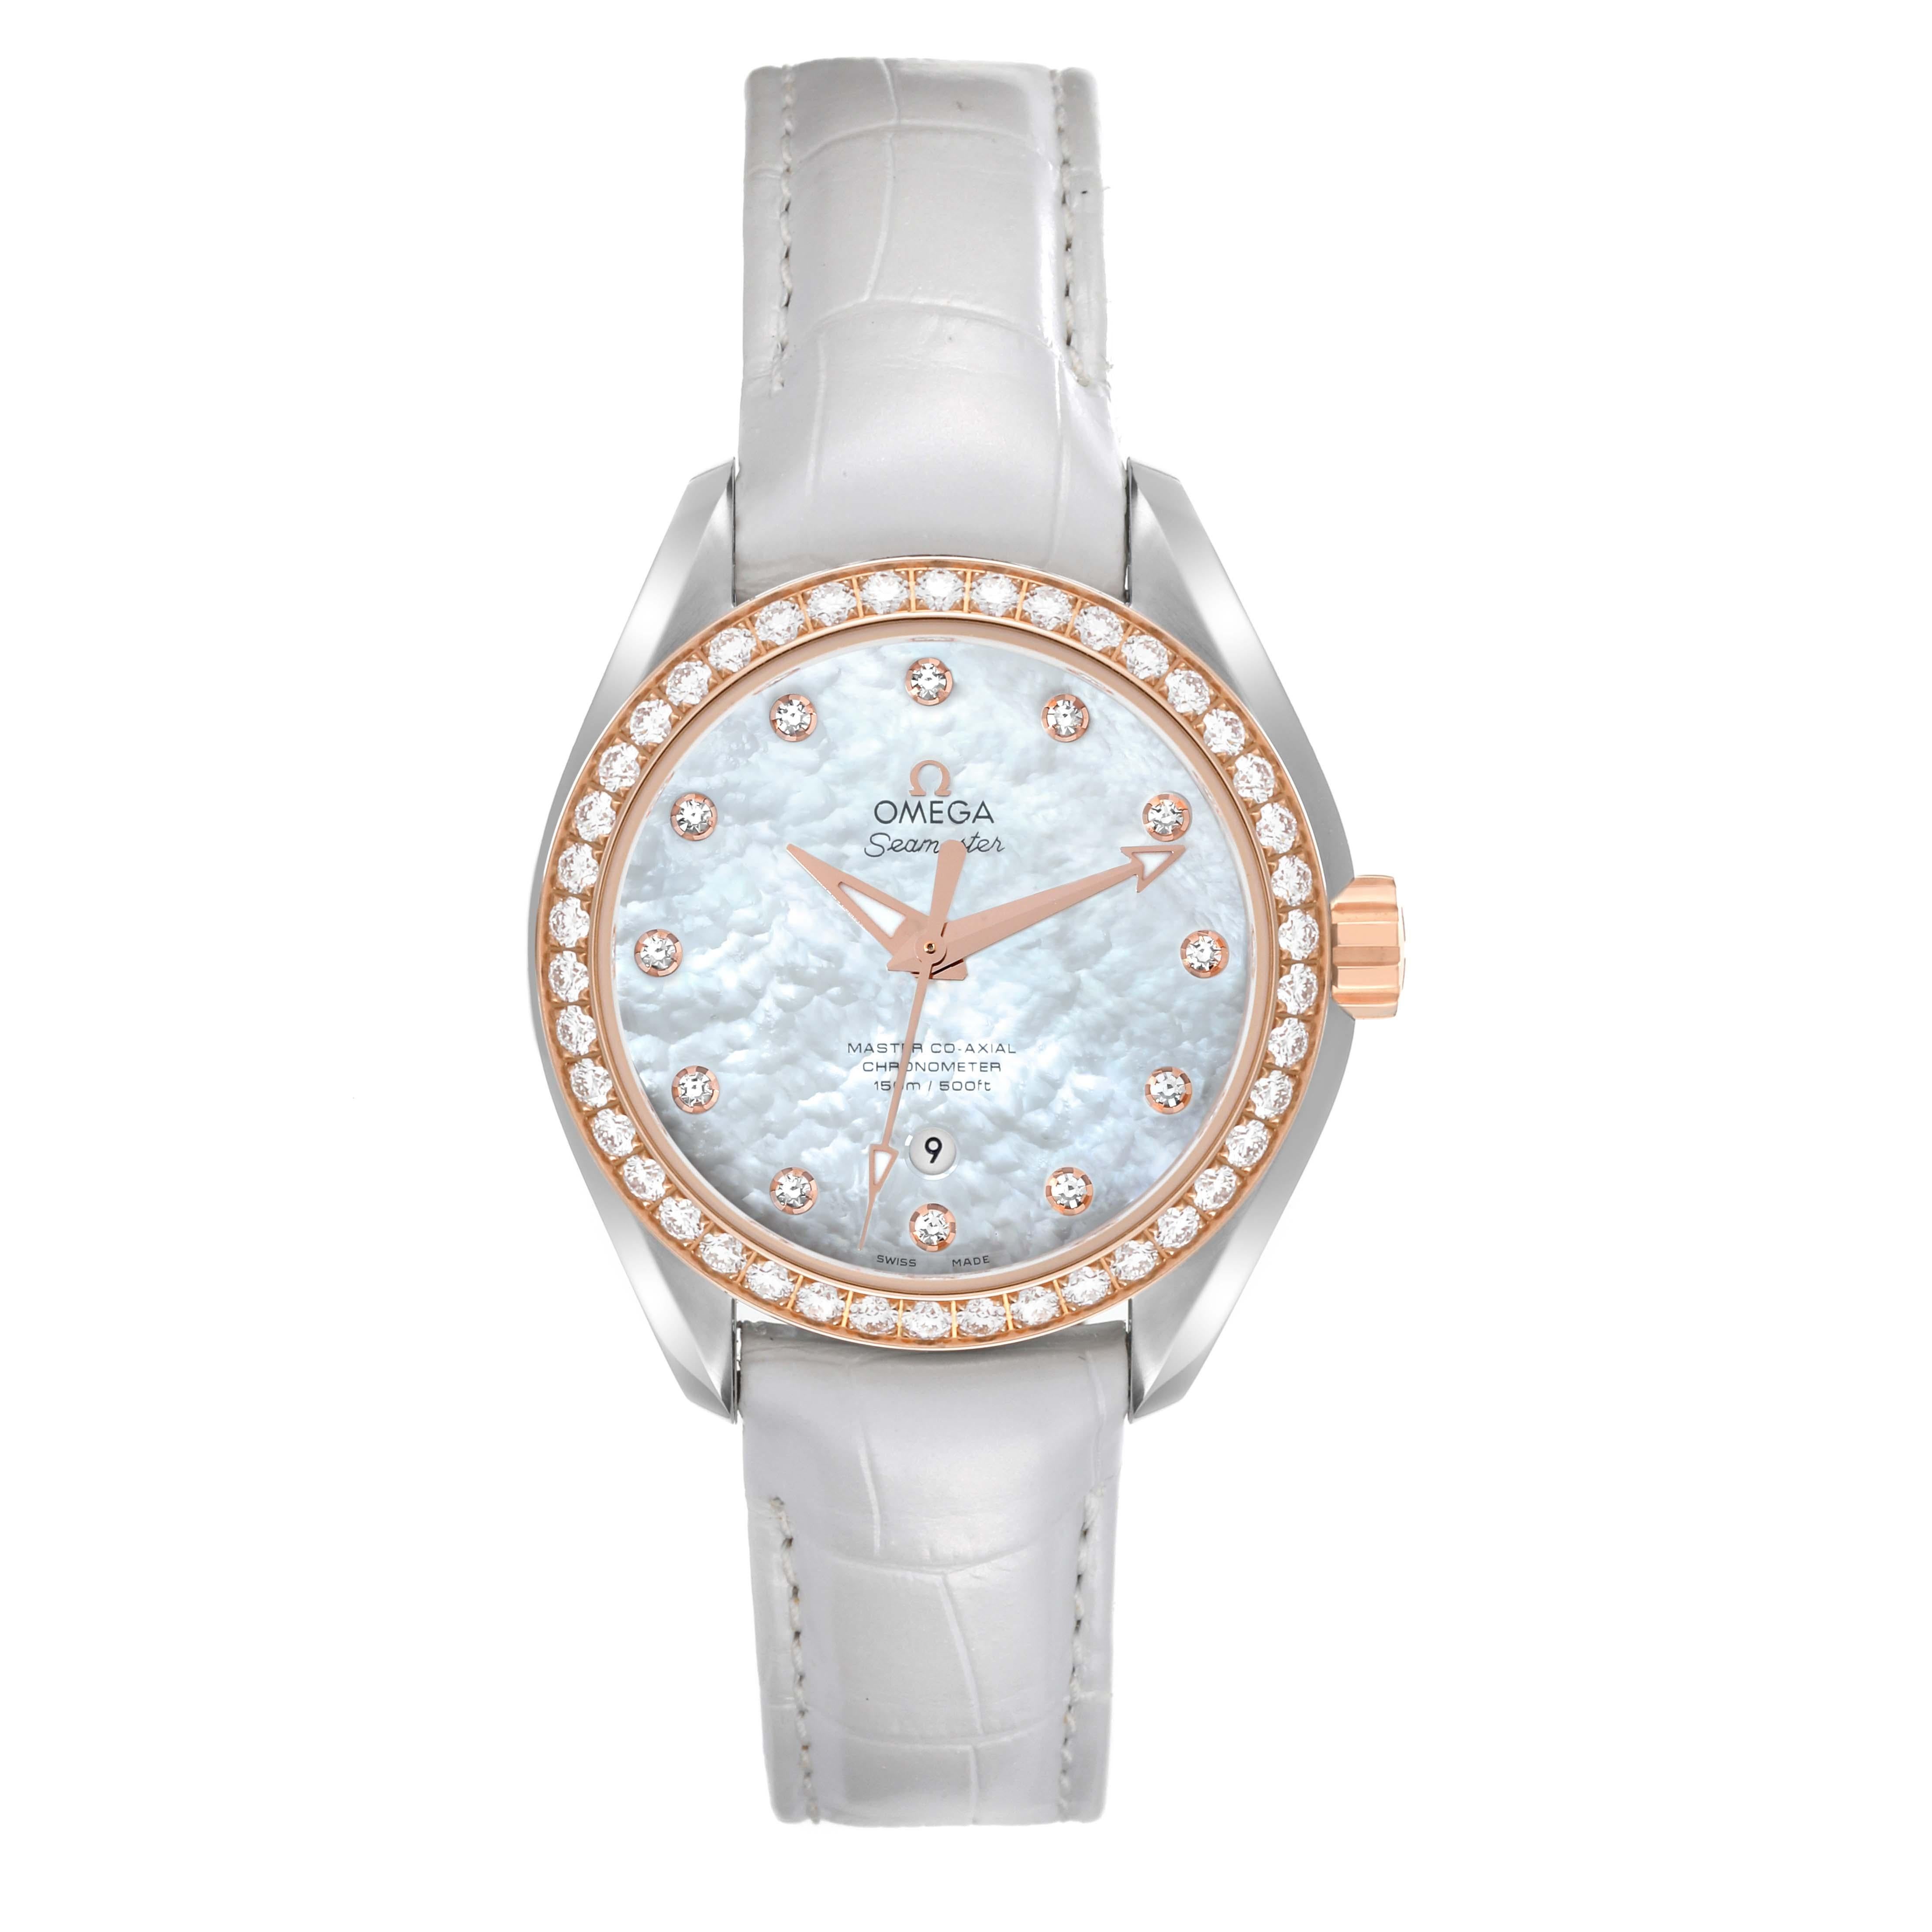 Omega Aqua Terra Steel Rose Gold Diamond Ladies Watch 231.28.34.20.55.003 Unworn. Automatic self-winding movement. . Stainless steel round case 34 mm in diameter. Omega Sedna rose gold crown with Omega logo. Exhibition transparent sapphire crystal